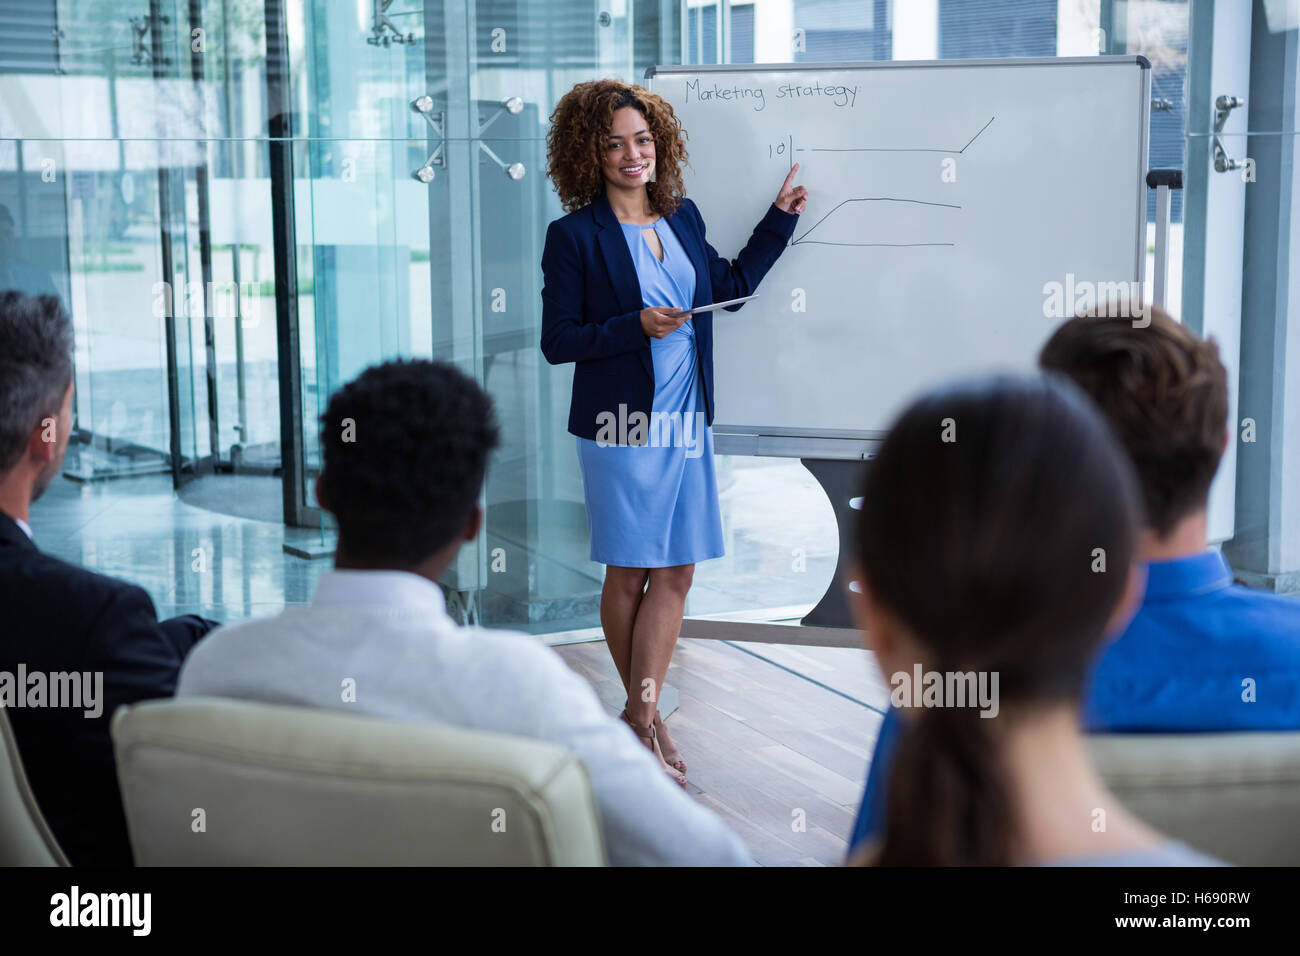 Businesswoman discussing on white board with coworkers Stock Photo